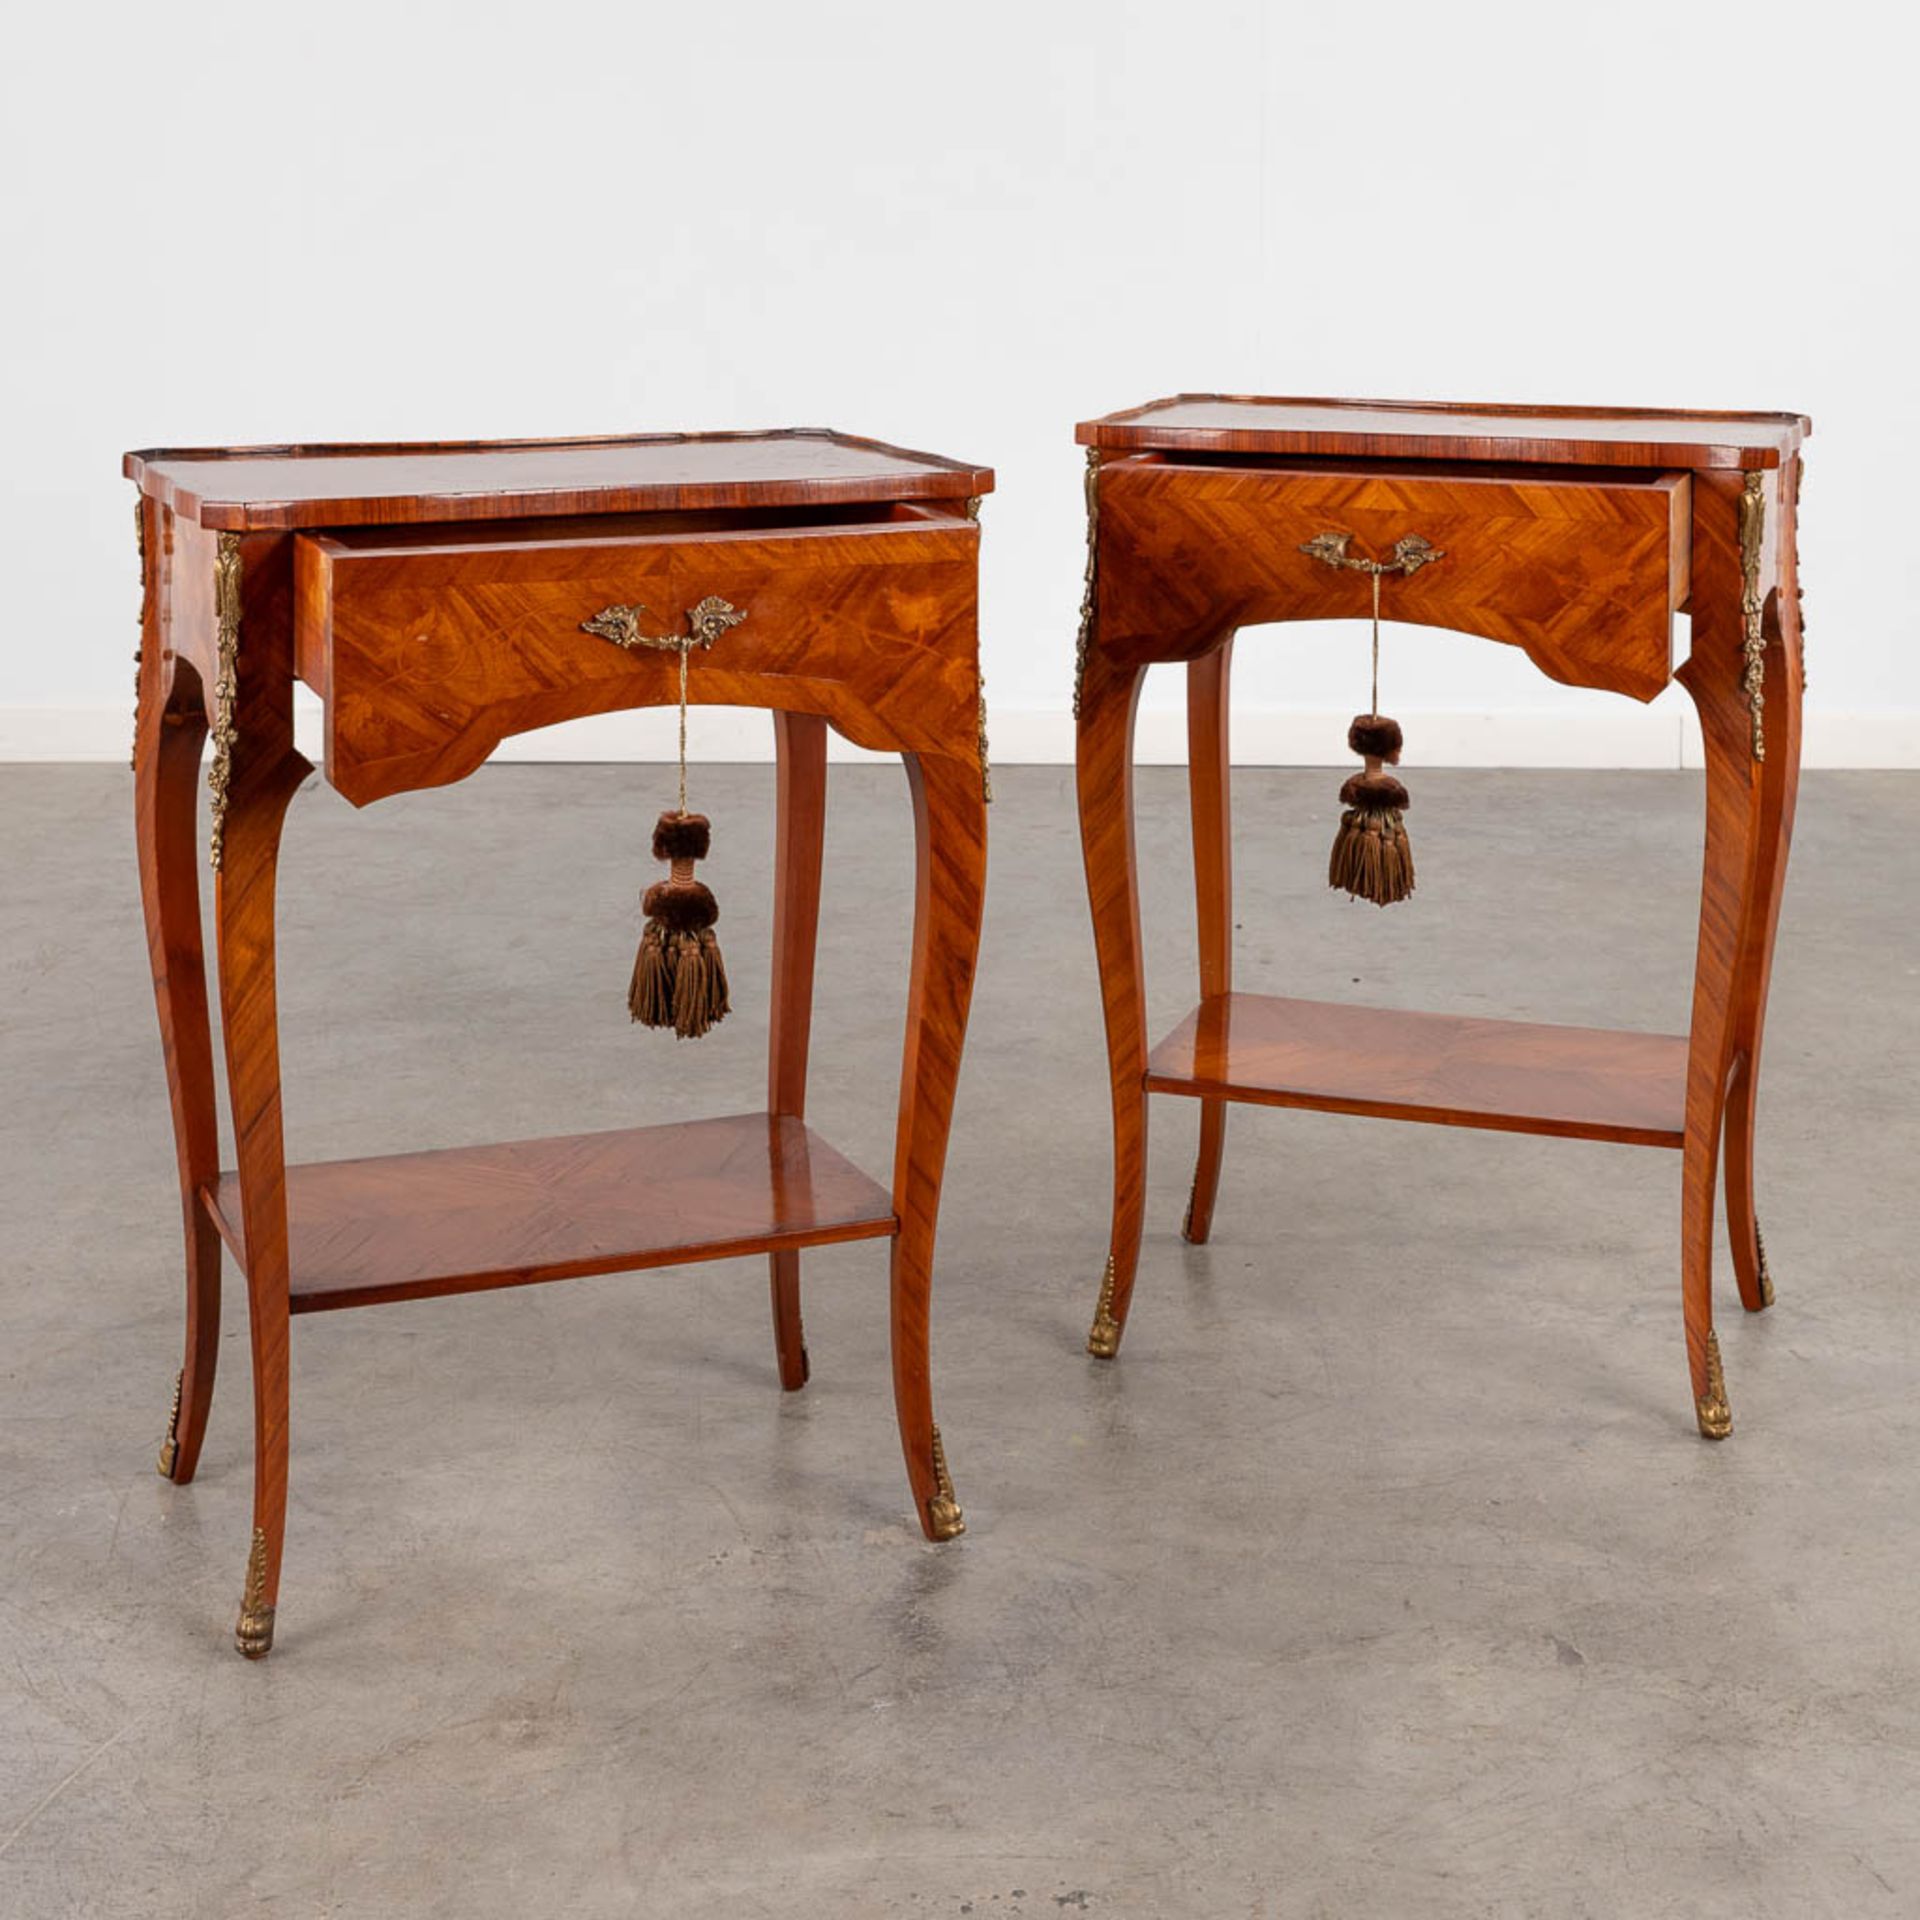 A pair of two-tier side tables with a drawer, wood with marquetry inlay. 20th C. (D:30 x W:45 x H:63 - Image 3 of 14